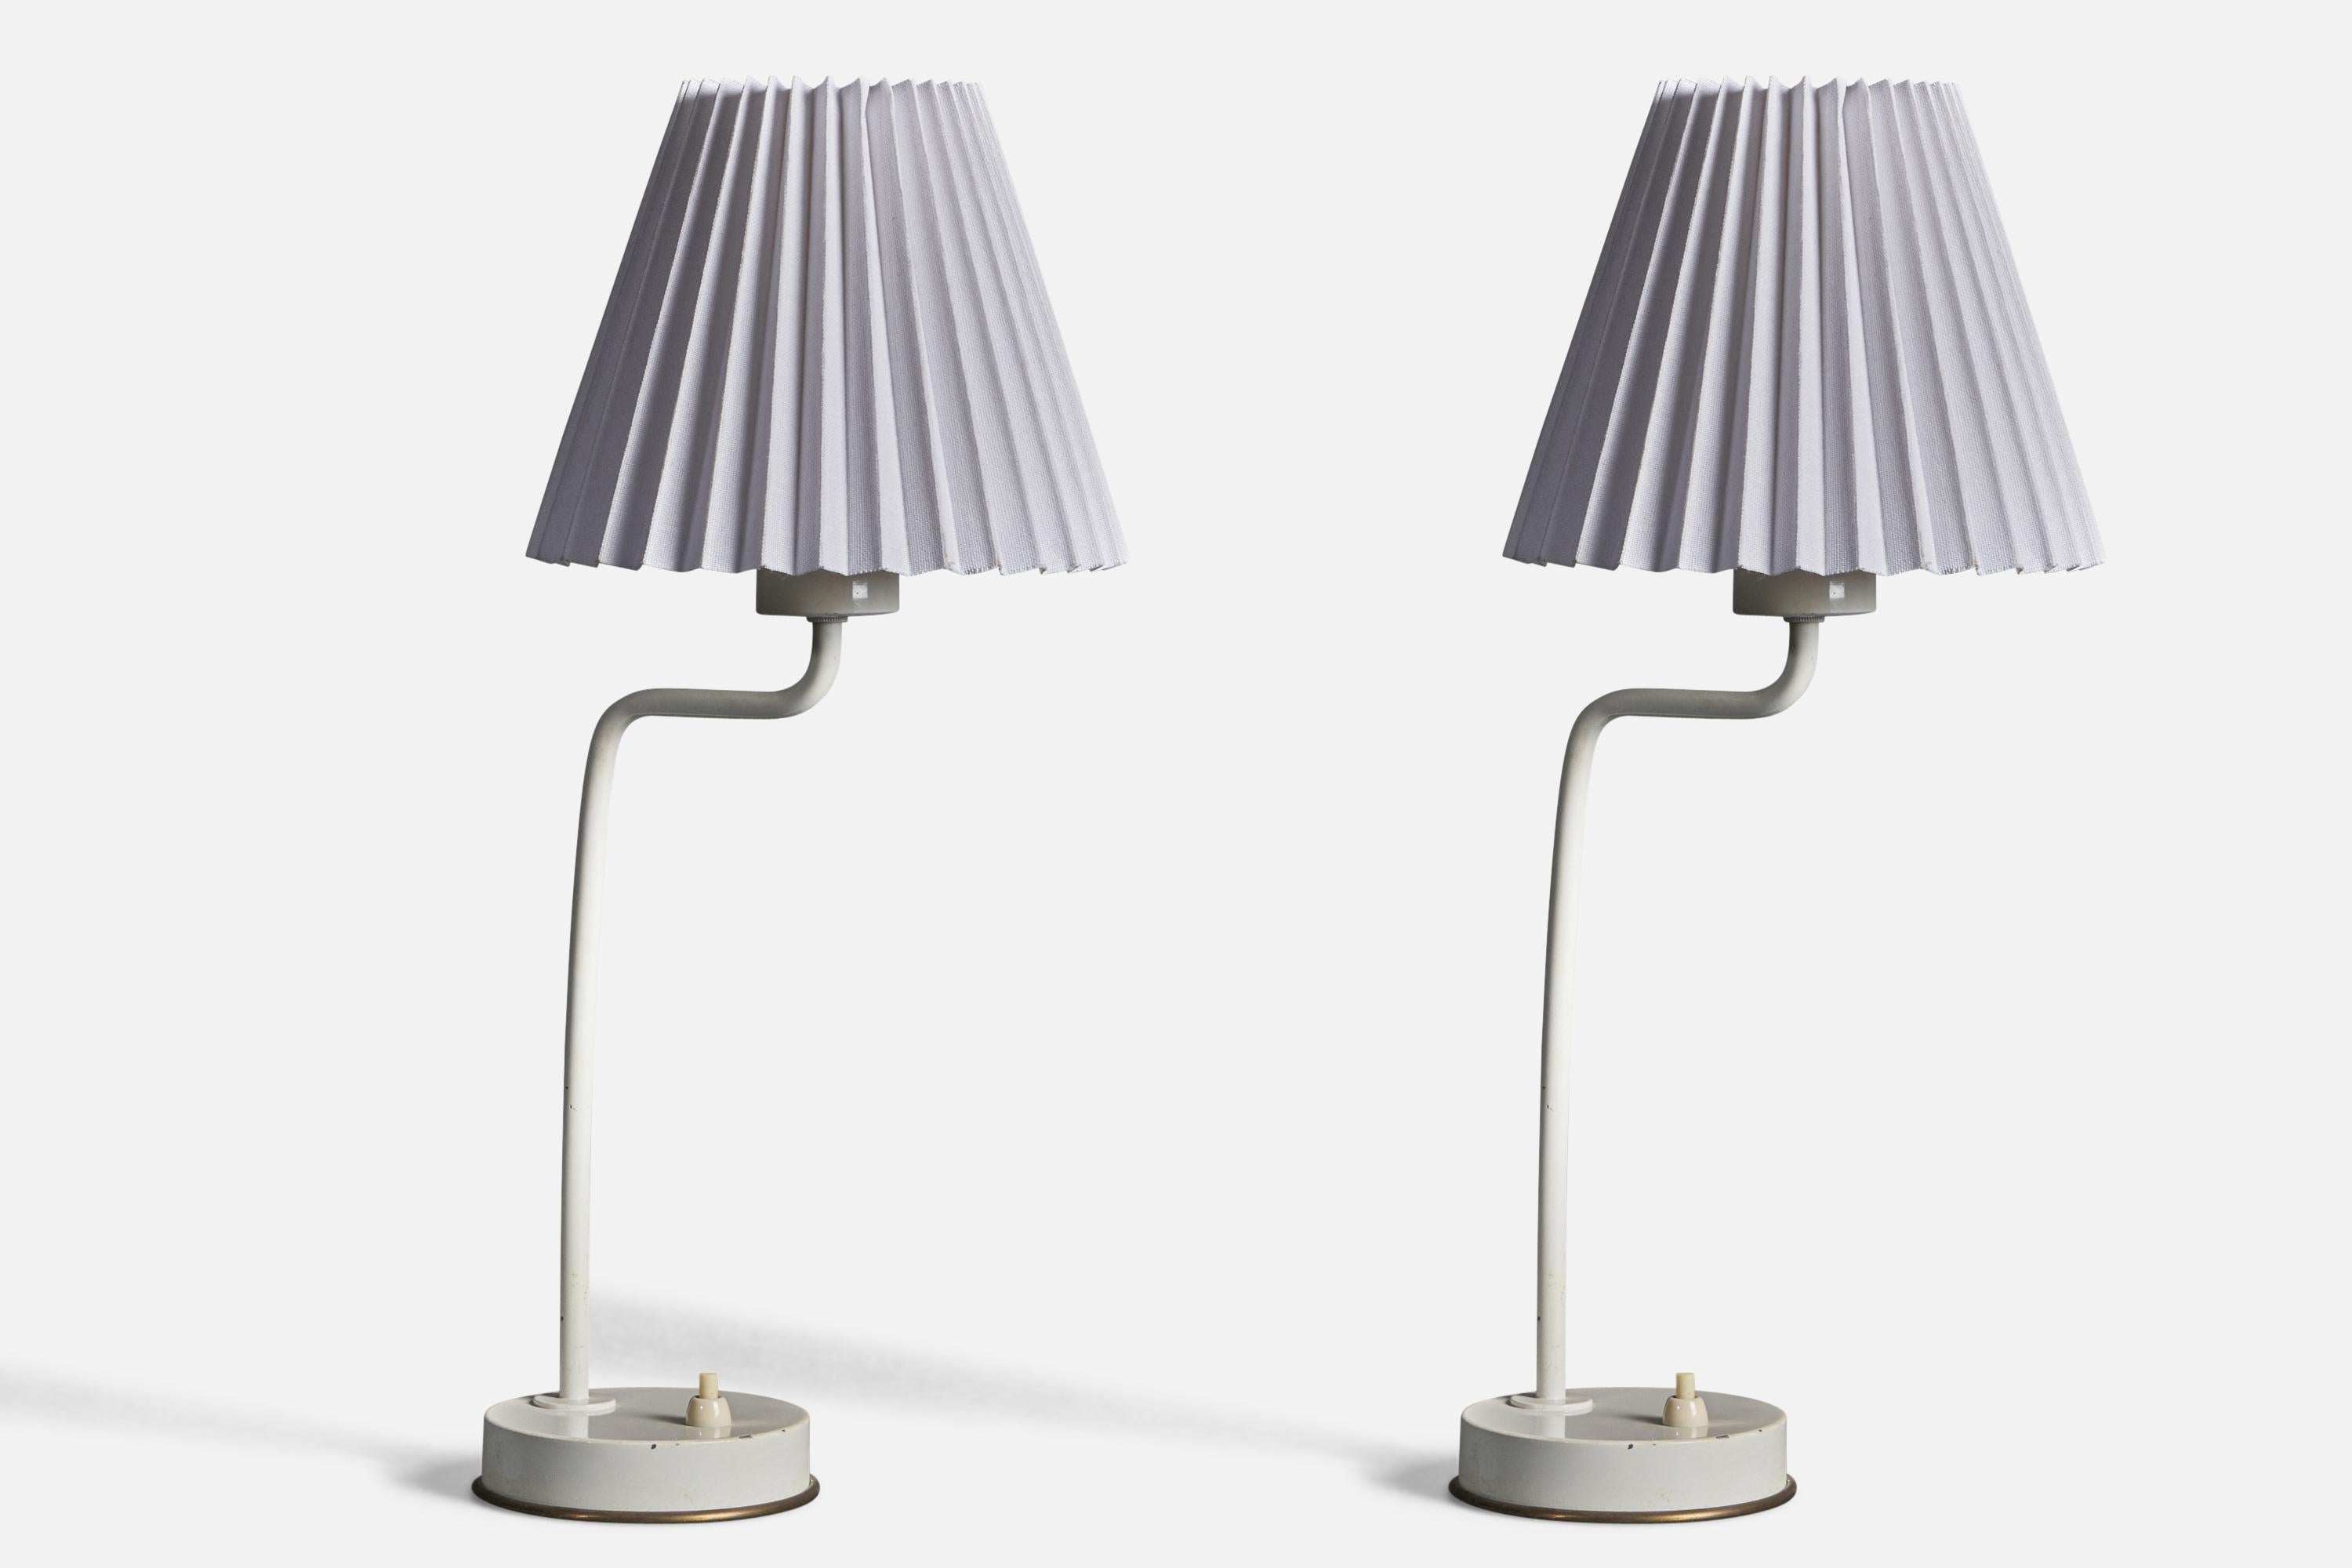 A pair of table lamps, designed by Hans-Agne Jakobsson for his own firm in Markaryd, Sweden. c. 1970s. Labeled. 
Condition: Good Wear consistent with age and use. 
Dimensions of Lamp (inches): 13.75” H x 4.4” W x 5.5” D 
Dimensions of Shade